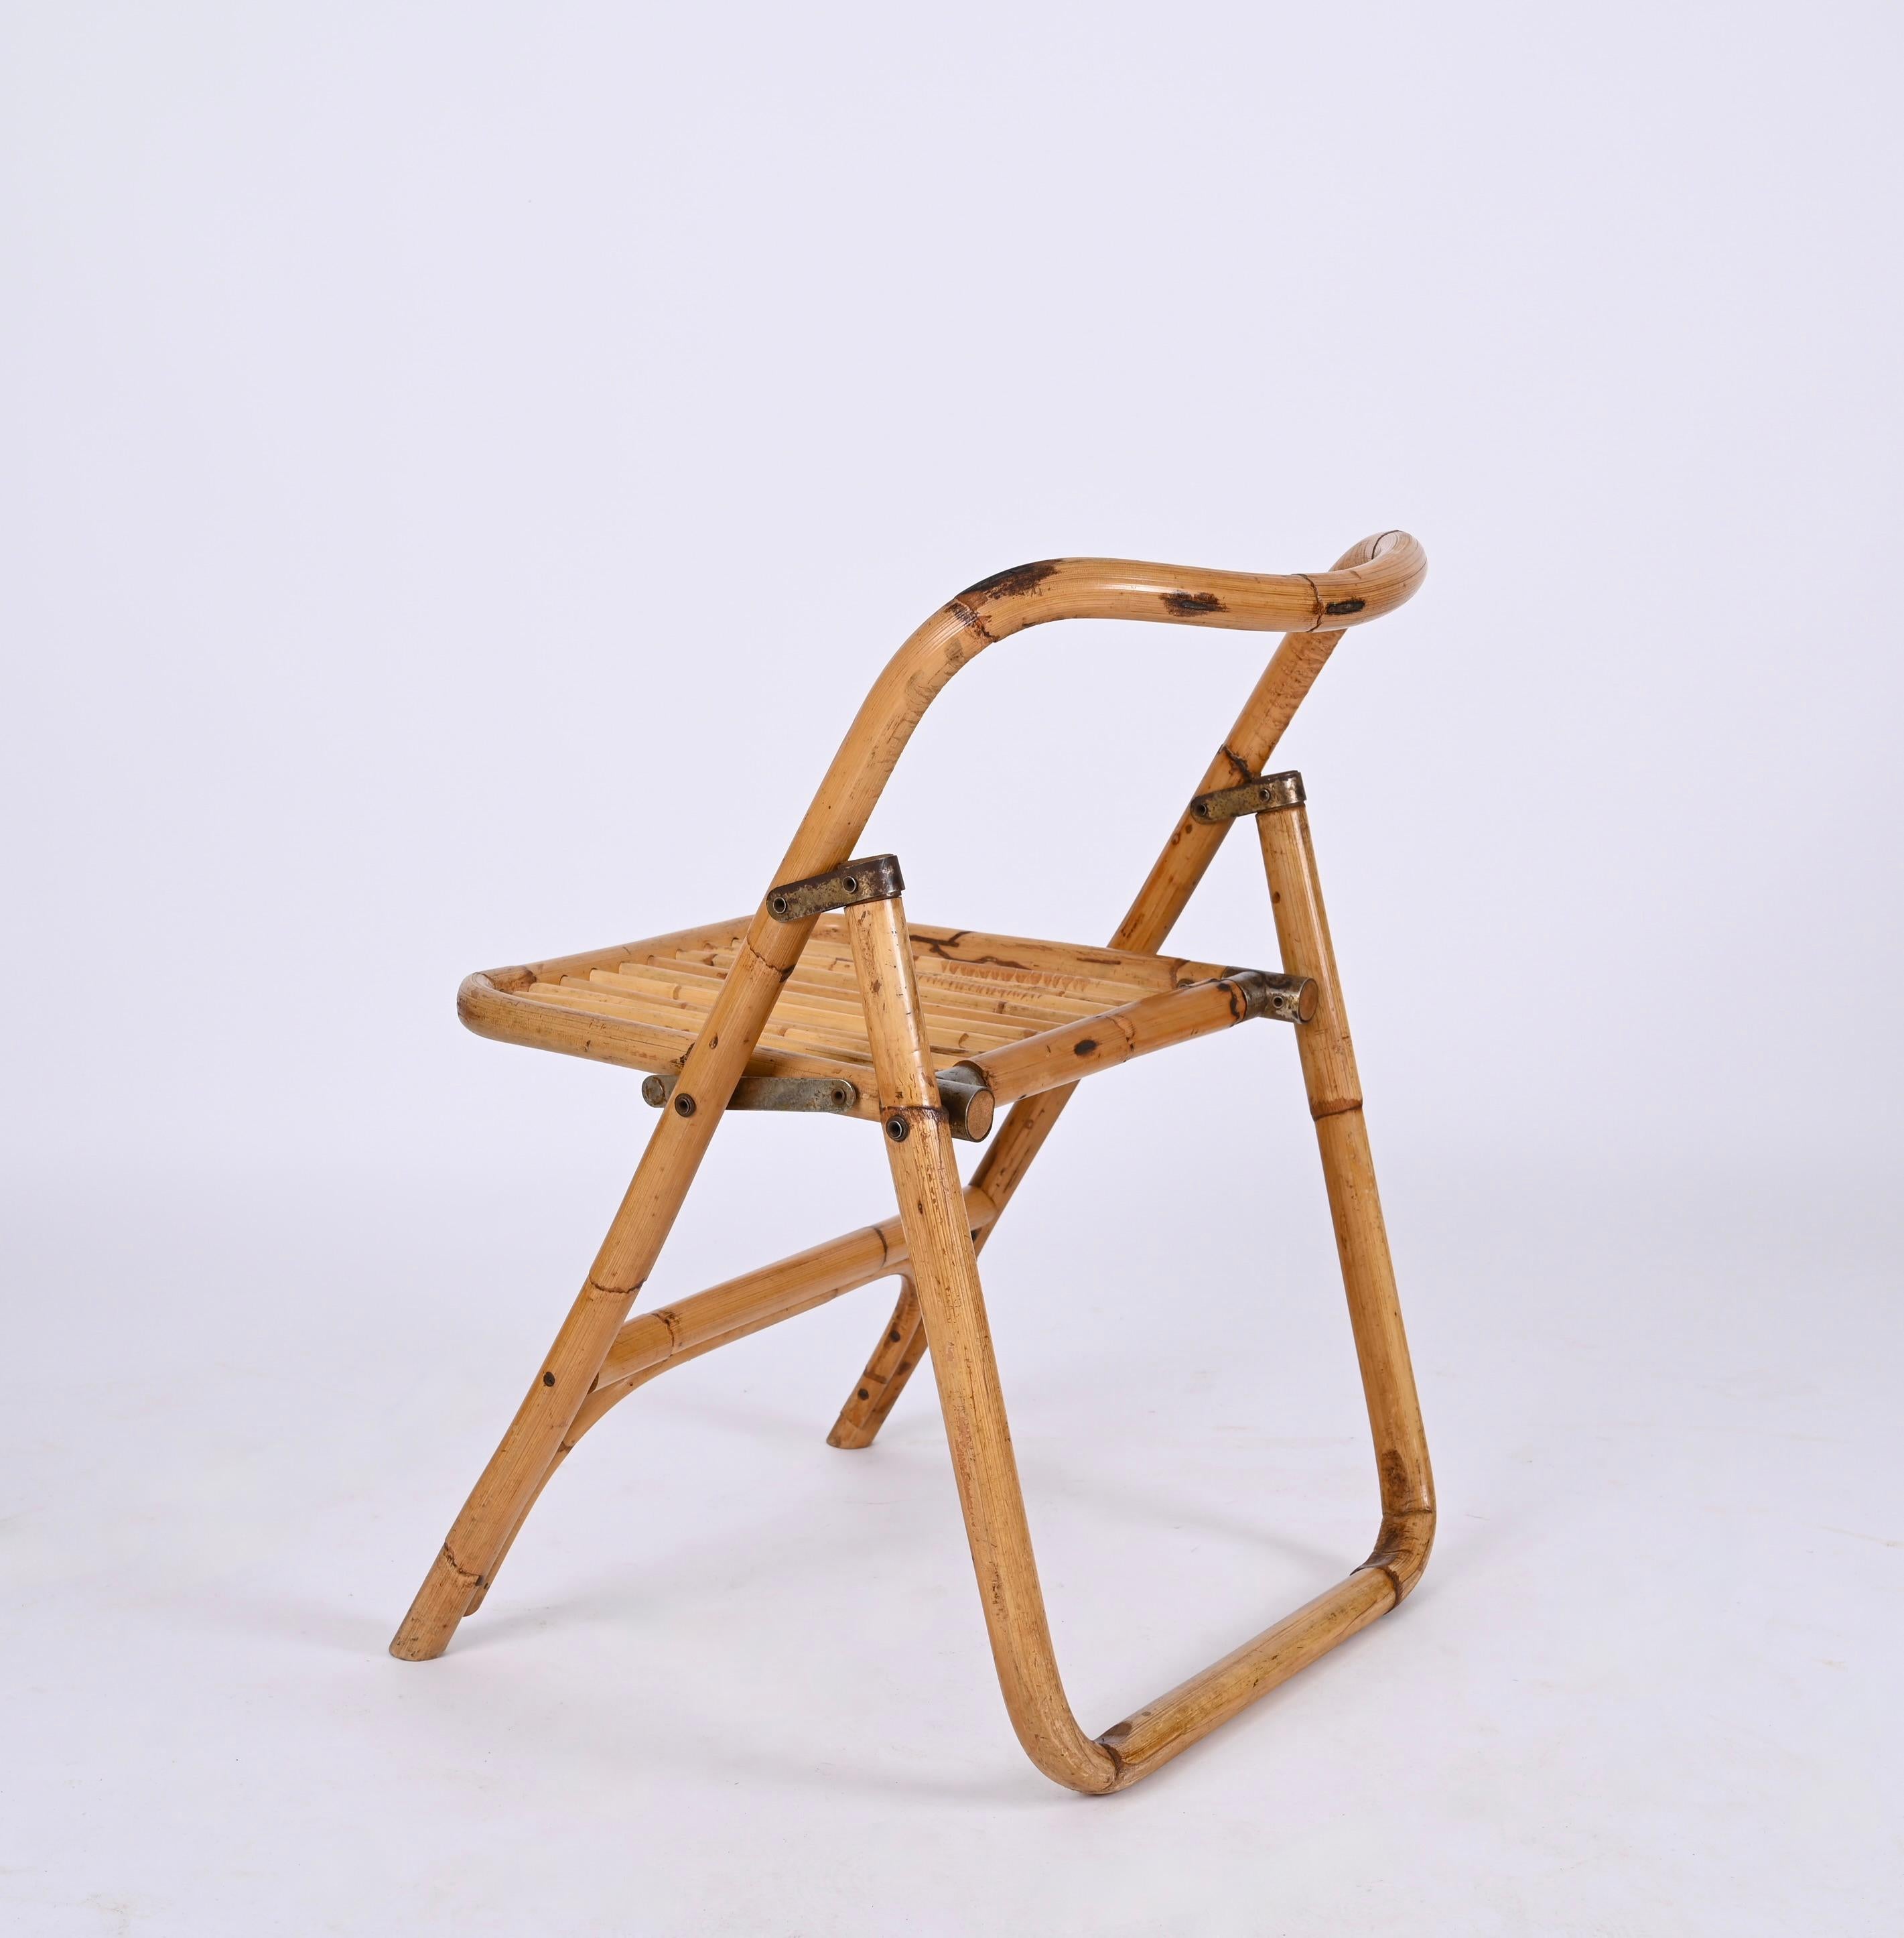 Wonderful original Dal Vera bamboo folding chairs, produced in Italy in the 1960s.

The lines of these chairs are incredible, handmade in curved bamboo with perfect proportions, example of Italian manufacture from the 1960s.
The overall result is